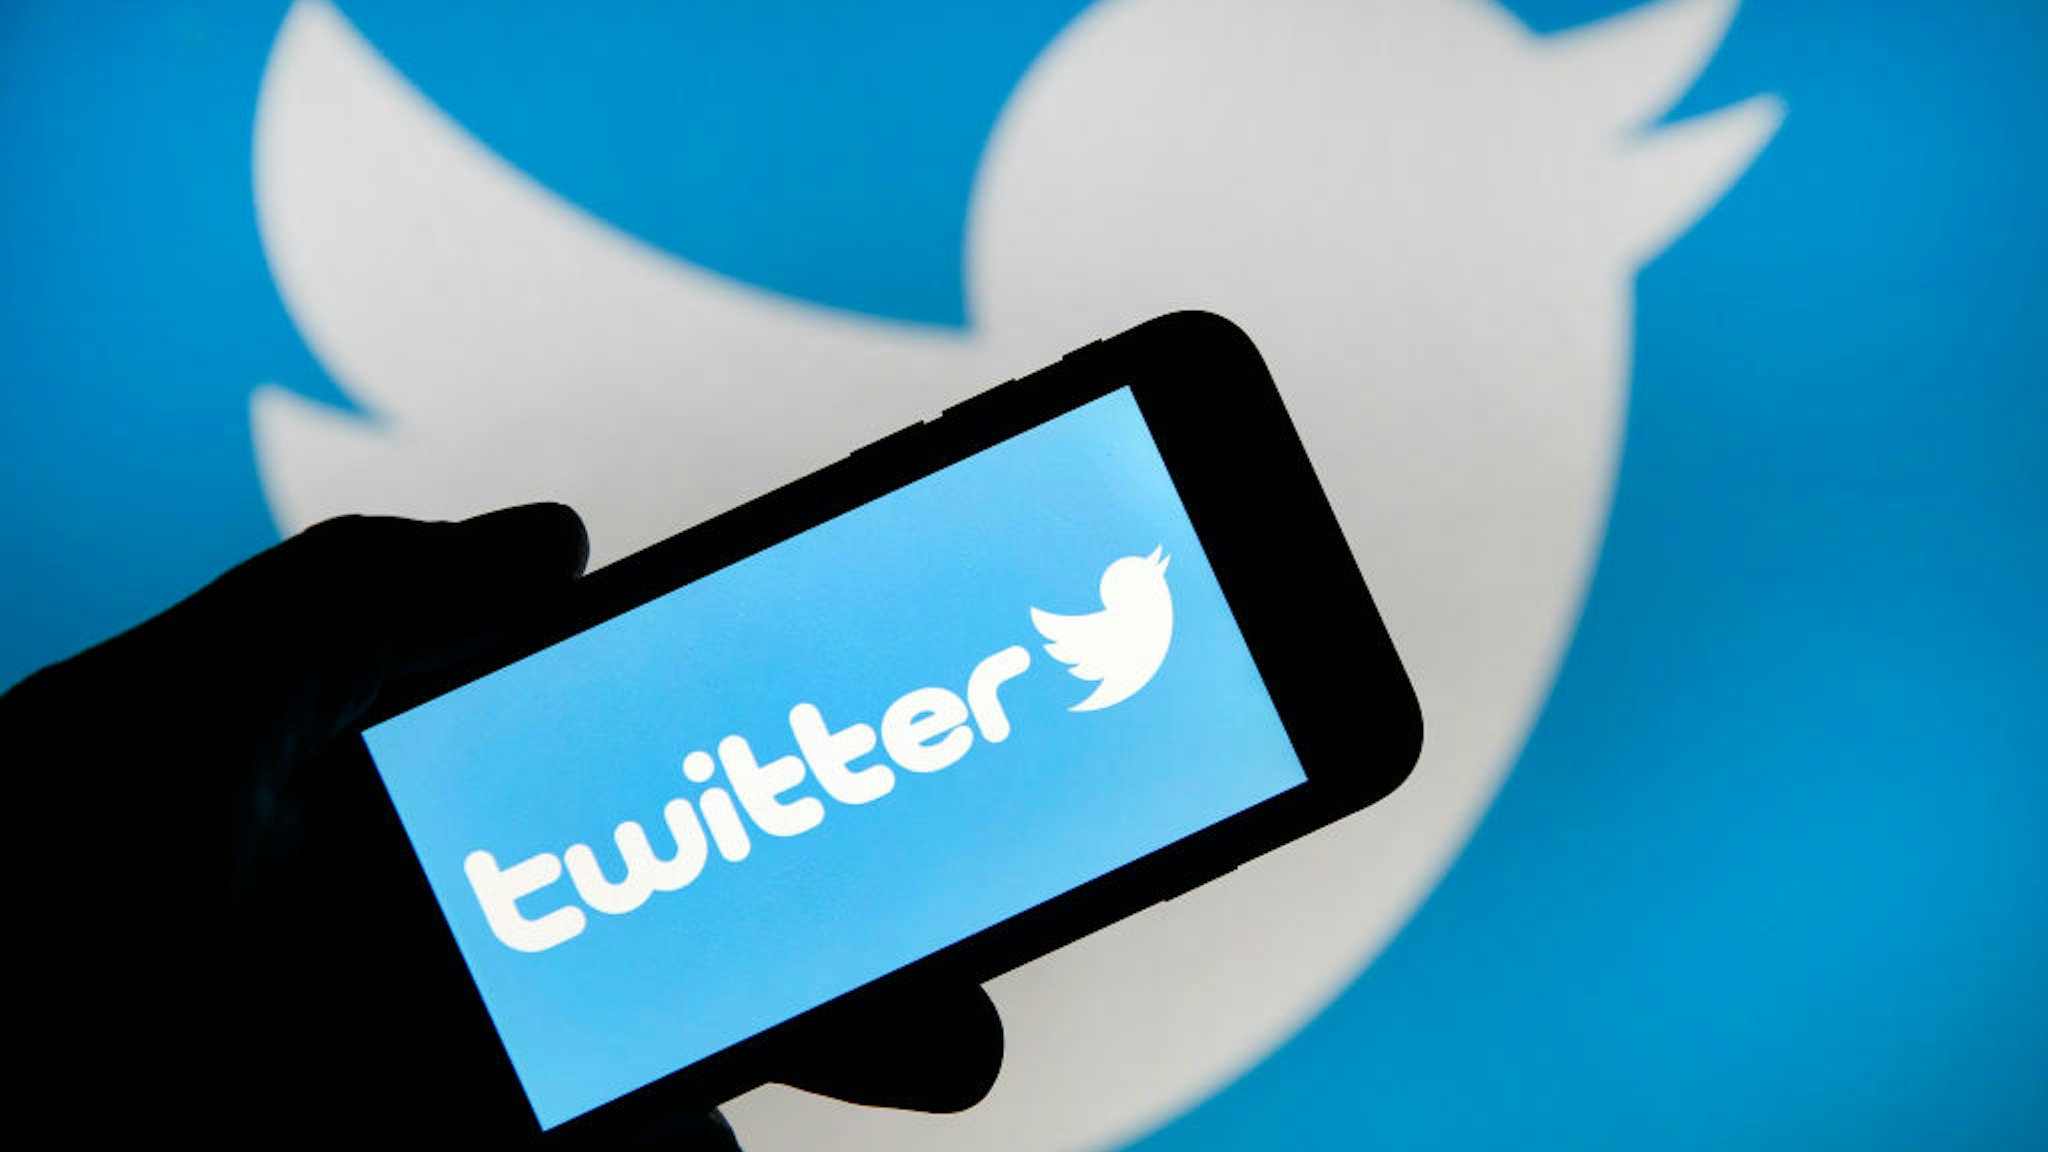 PARIS, FRANCE - FEBRUARY 07: In this photo illustration the Twitter logo is displayed on the screen of an iPhone in front of a computer screen displaying a Twitter logo on February 07, 2019 in Paris, France. Twitter today posted better than expected Wall Street results over the last three months of 2018, with net profit up 28% and revenue up 4%, but the stock is falling. After losing 5 million monthly users by the end of 2018, the social network Twitter decided to stop giving figures. In its financial results for the fourth quarter of 2018, the company explains that this announcement will take effect in the second quarter of 2019.